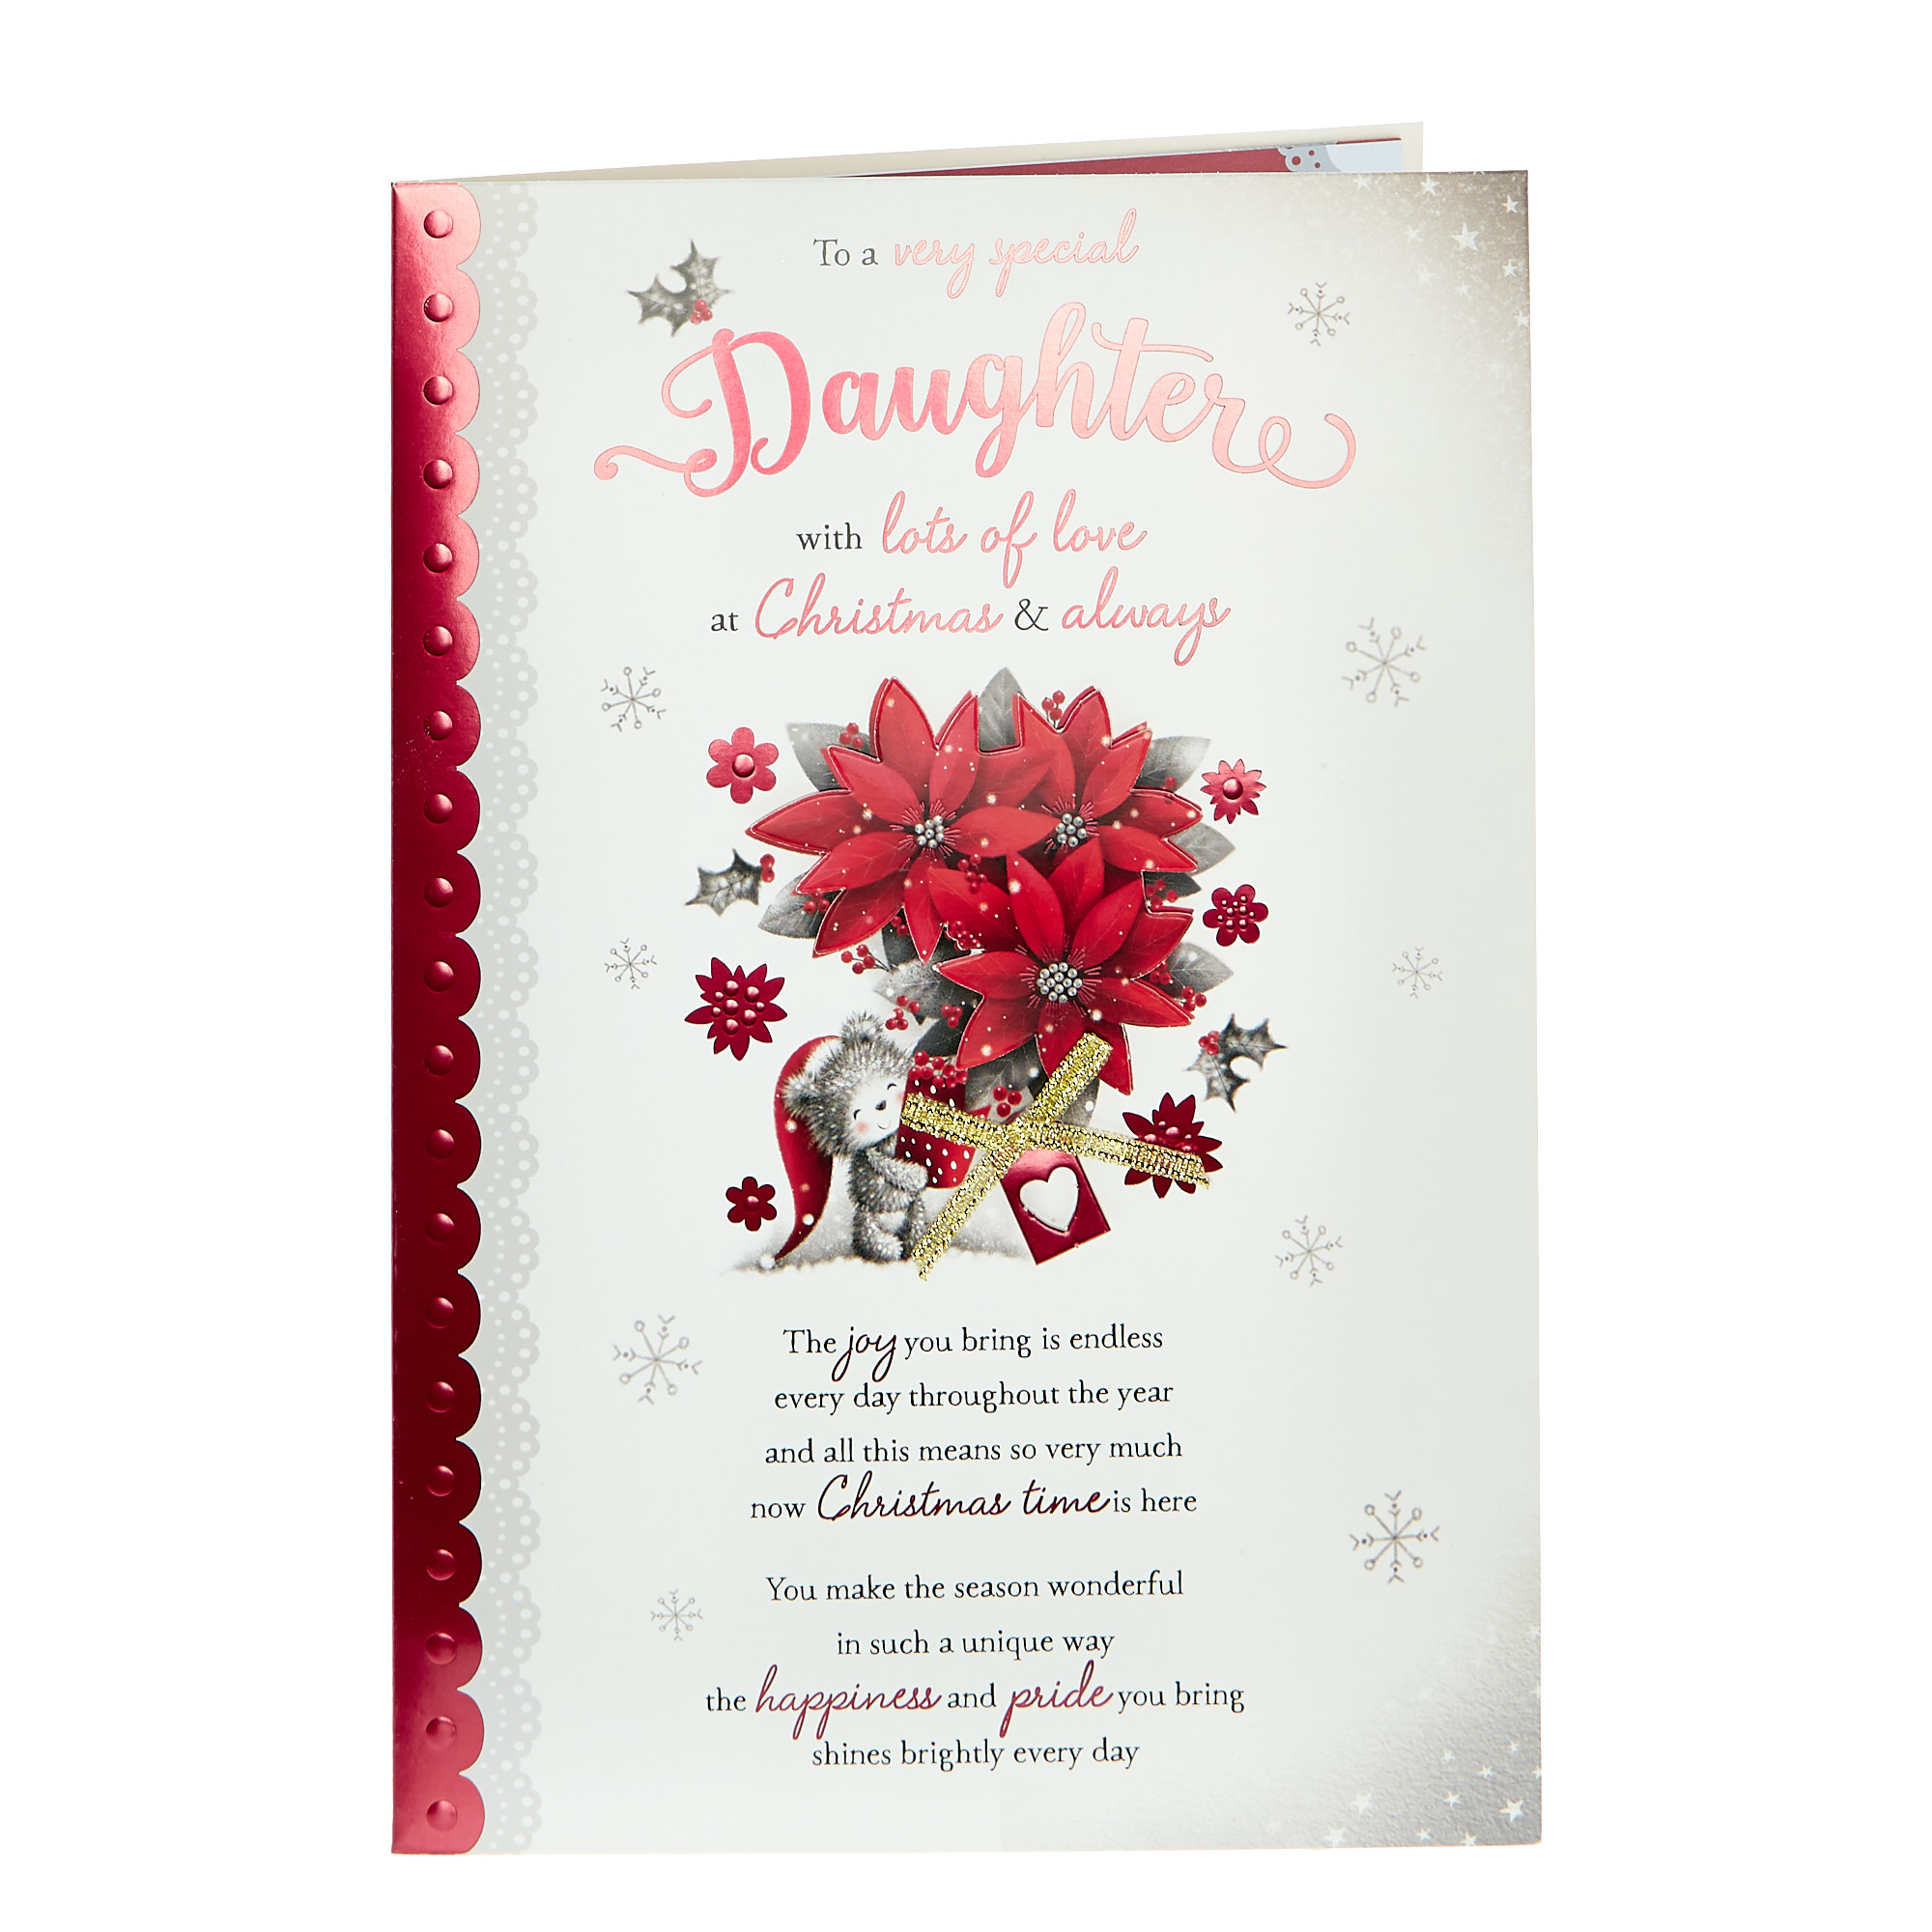 Christmas Card - Very Special Daughter With Lots Of Love